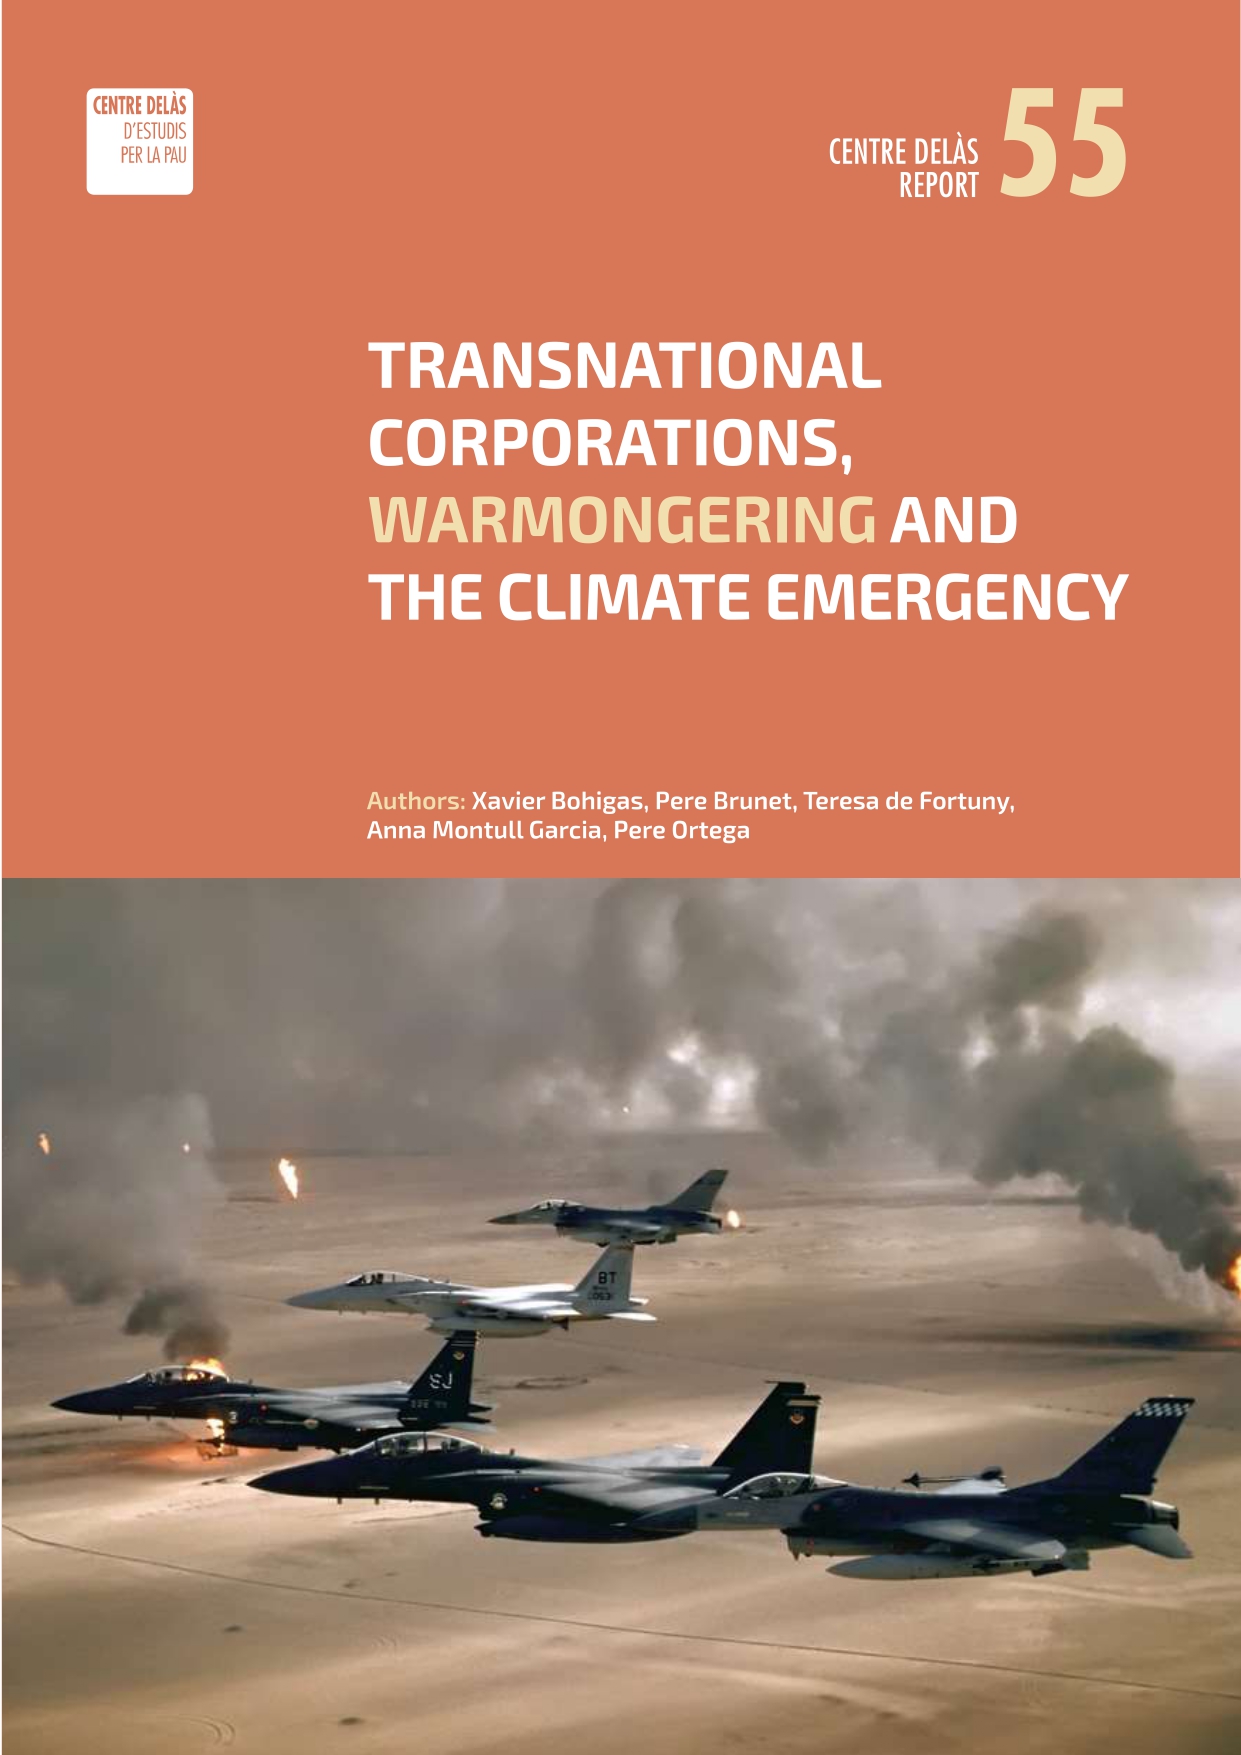 Report 55: “Transnational corporations, warmongering and the climate emergency”